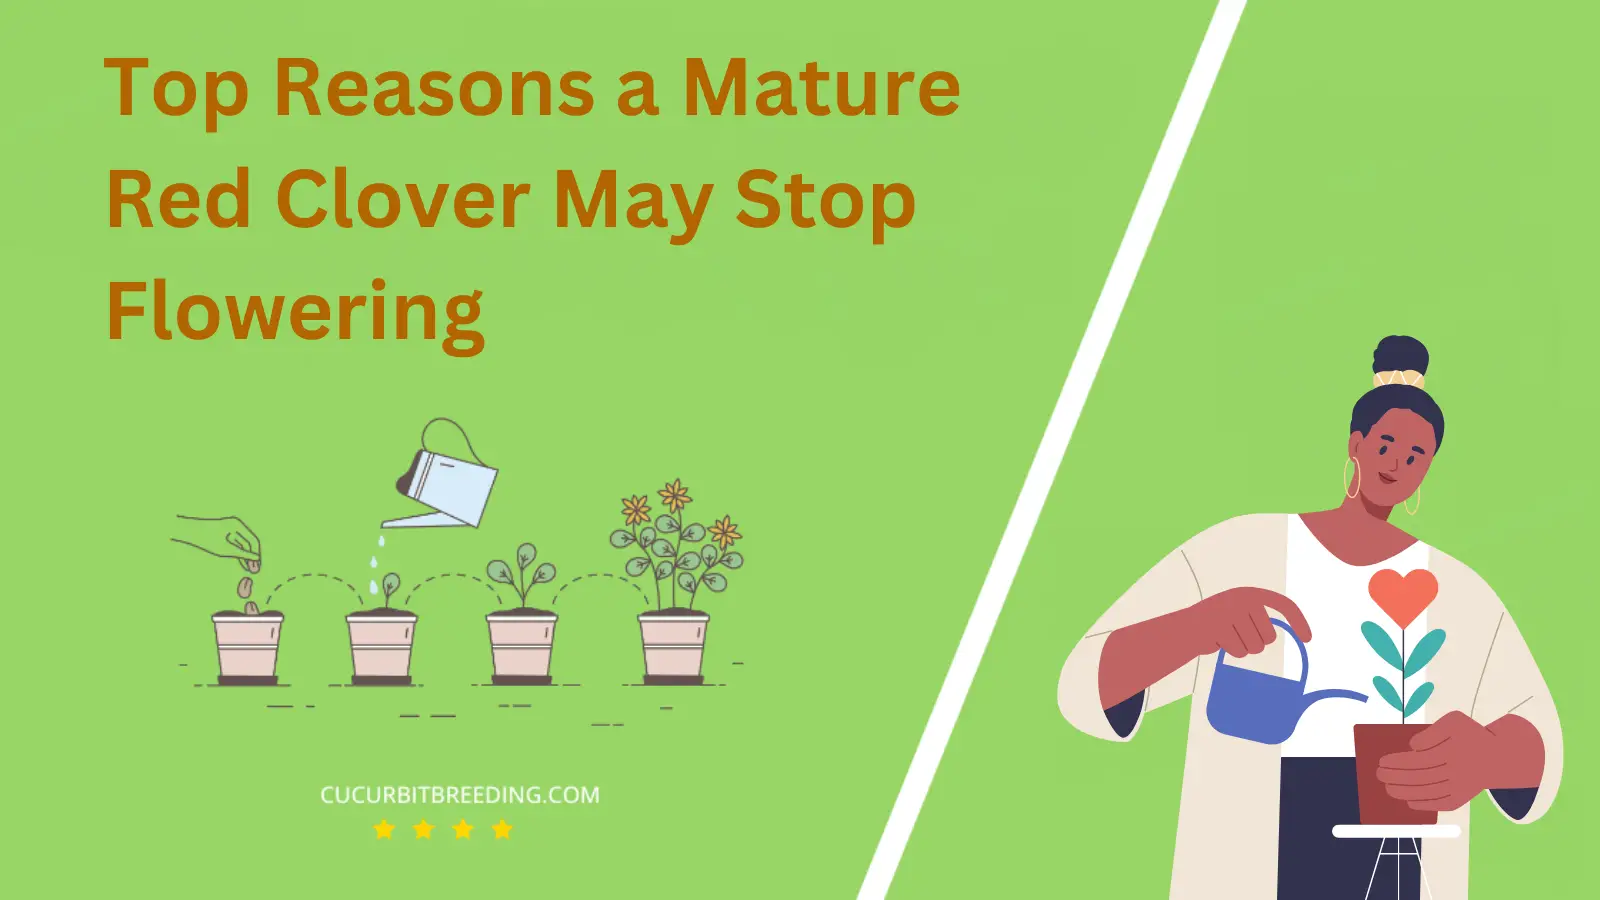 Top Reasons a Mature Red Clover May Stop Flowering